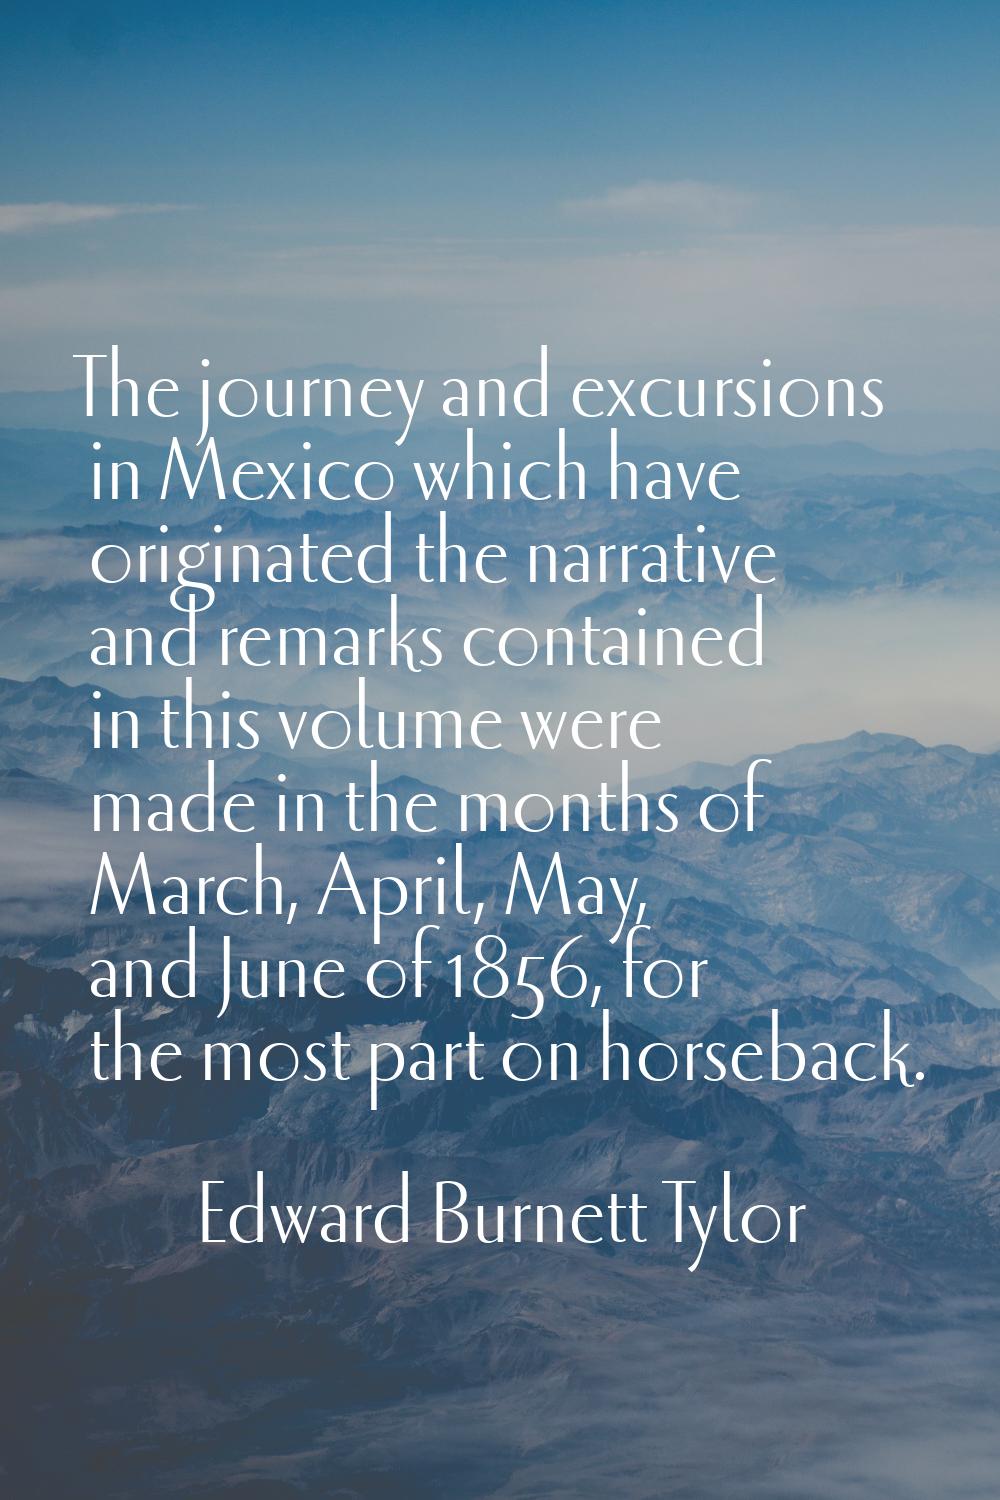 The journey and excursions in Mexico which have originated the narrative and remarks contained in t